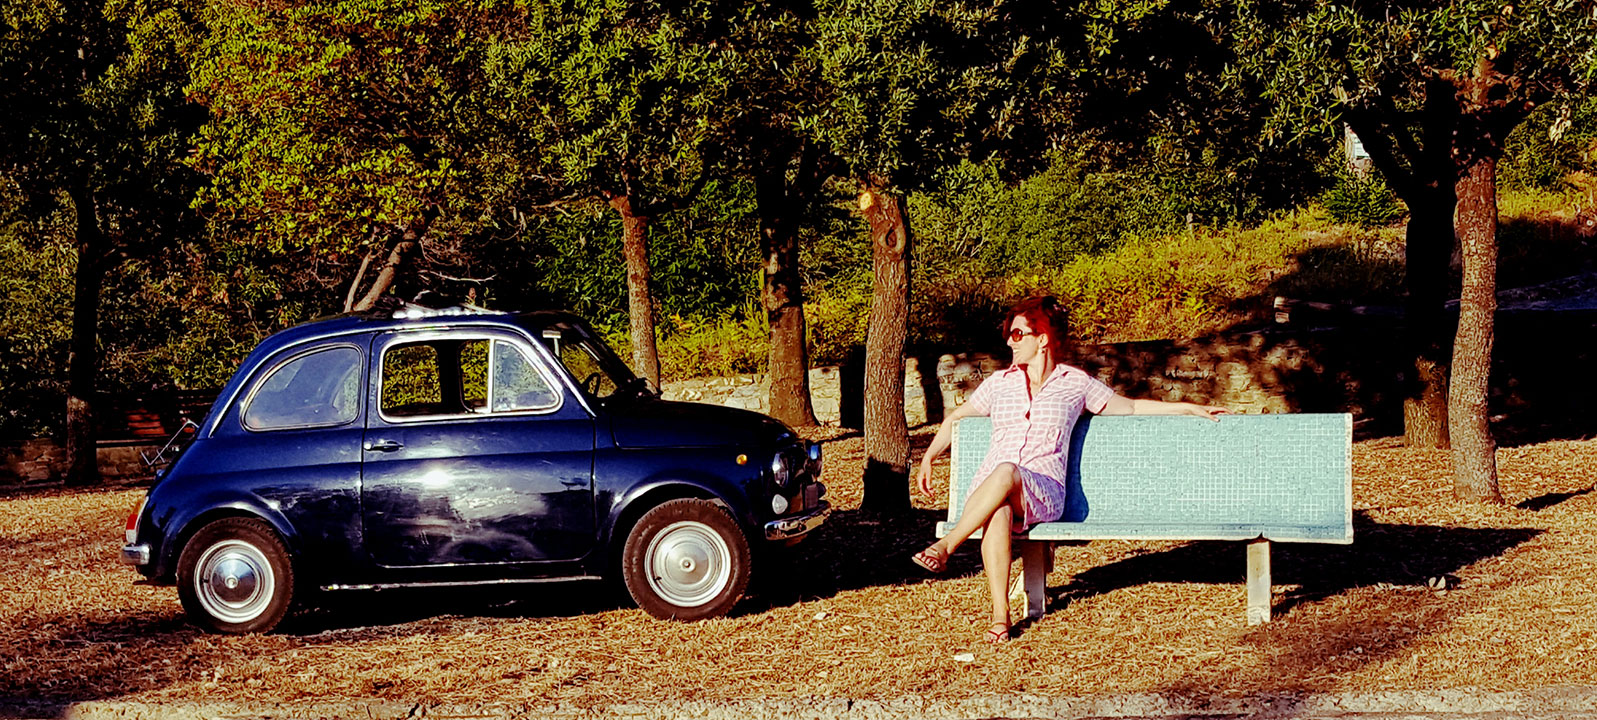 Travel journalist Lois Pryce sitting on a bench by an Italian vintage Fiat car